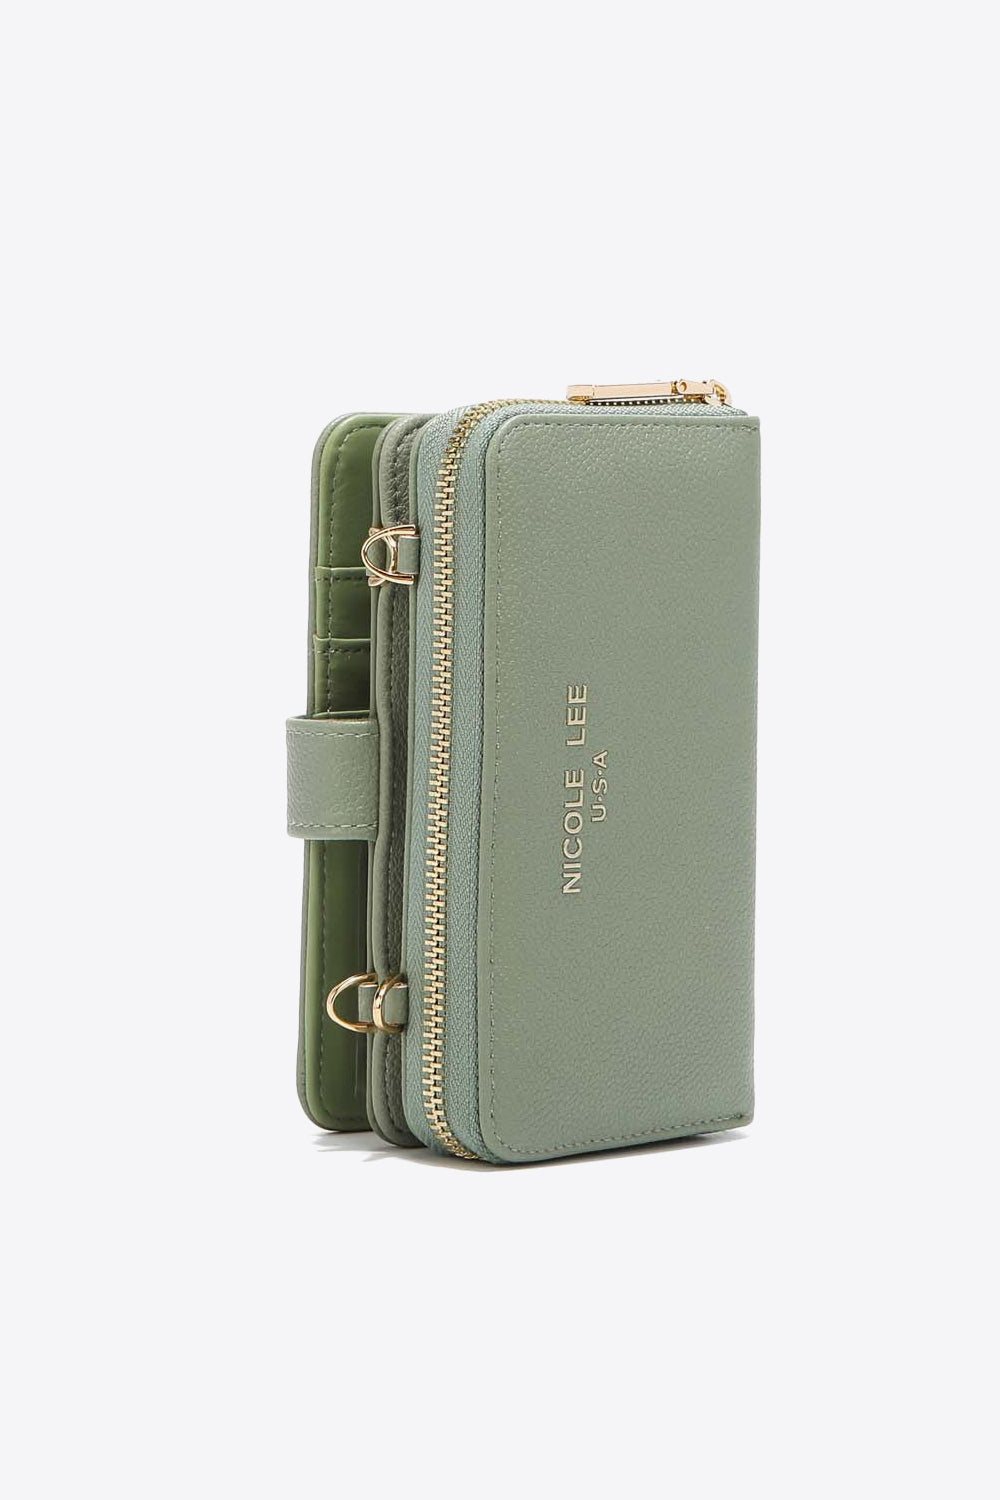 Two-Piece Crossbody Phone Case Wallet from Nicole Lee USA